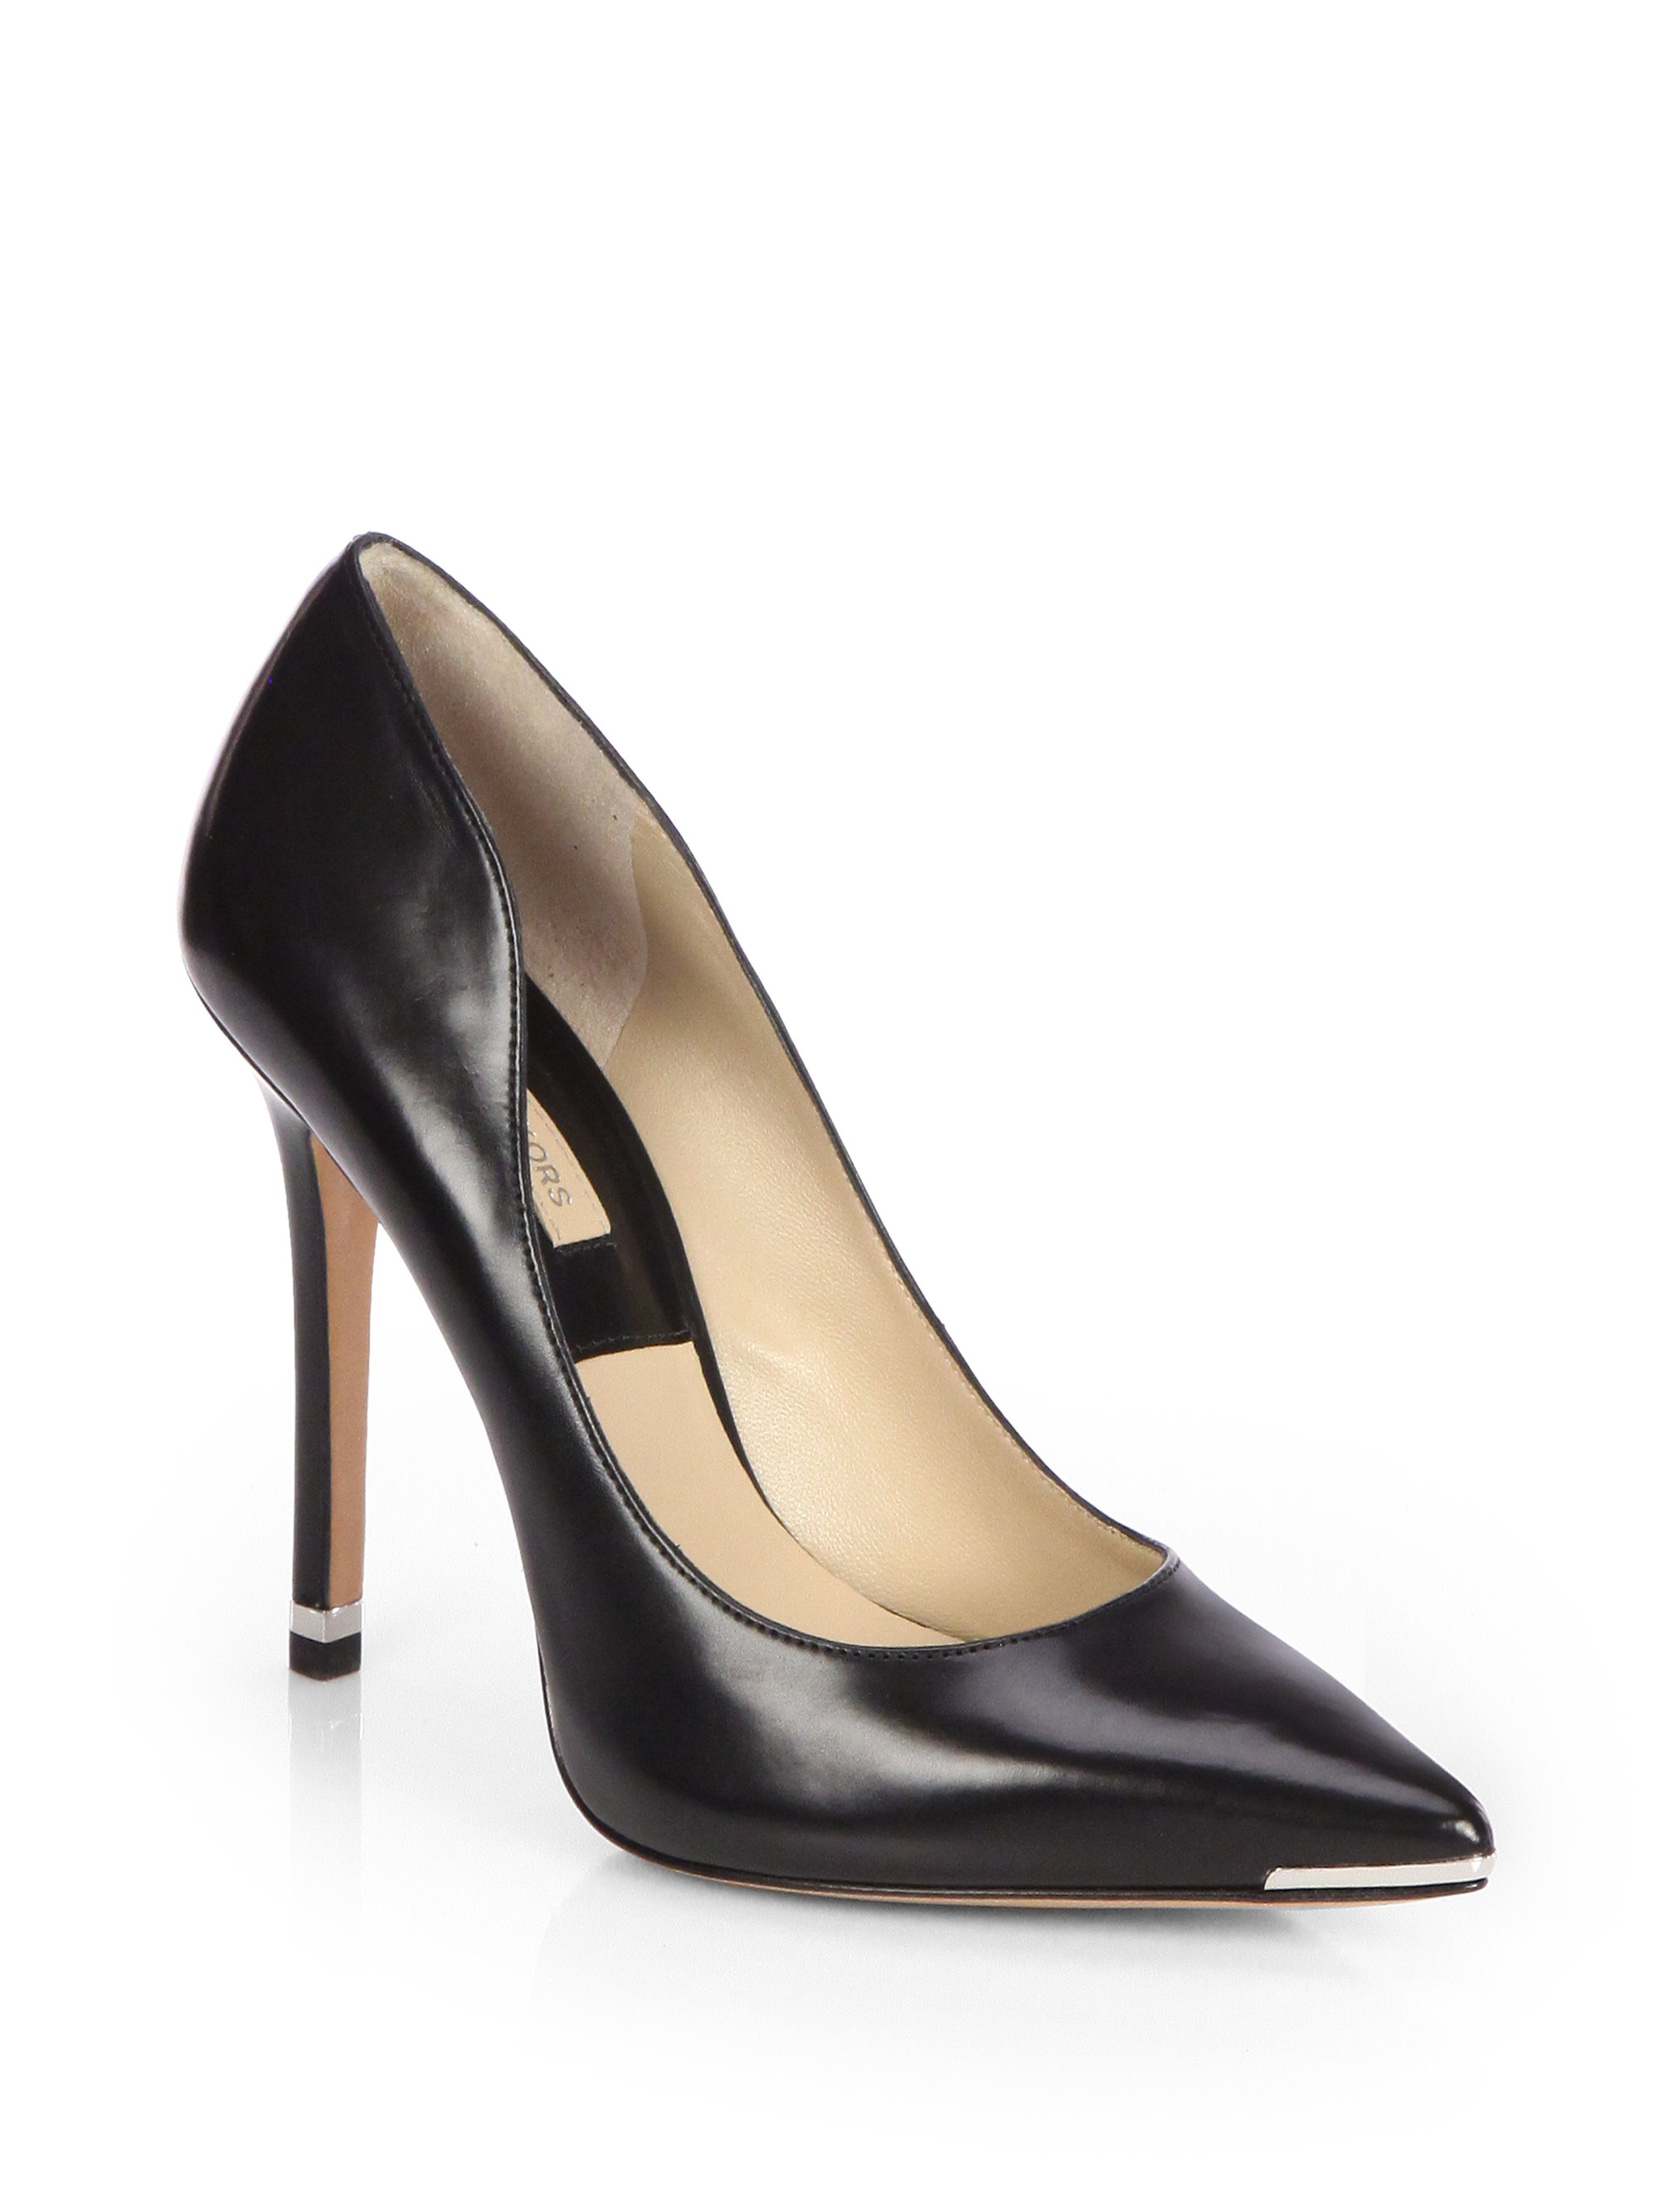 Michael Kors Avra Leather Pumps in 